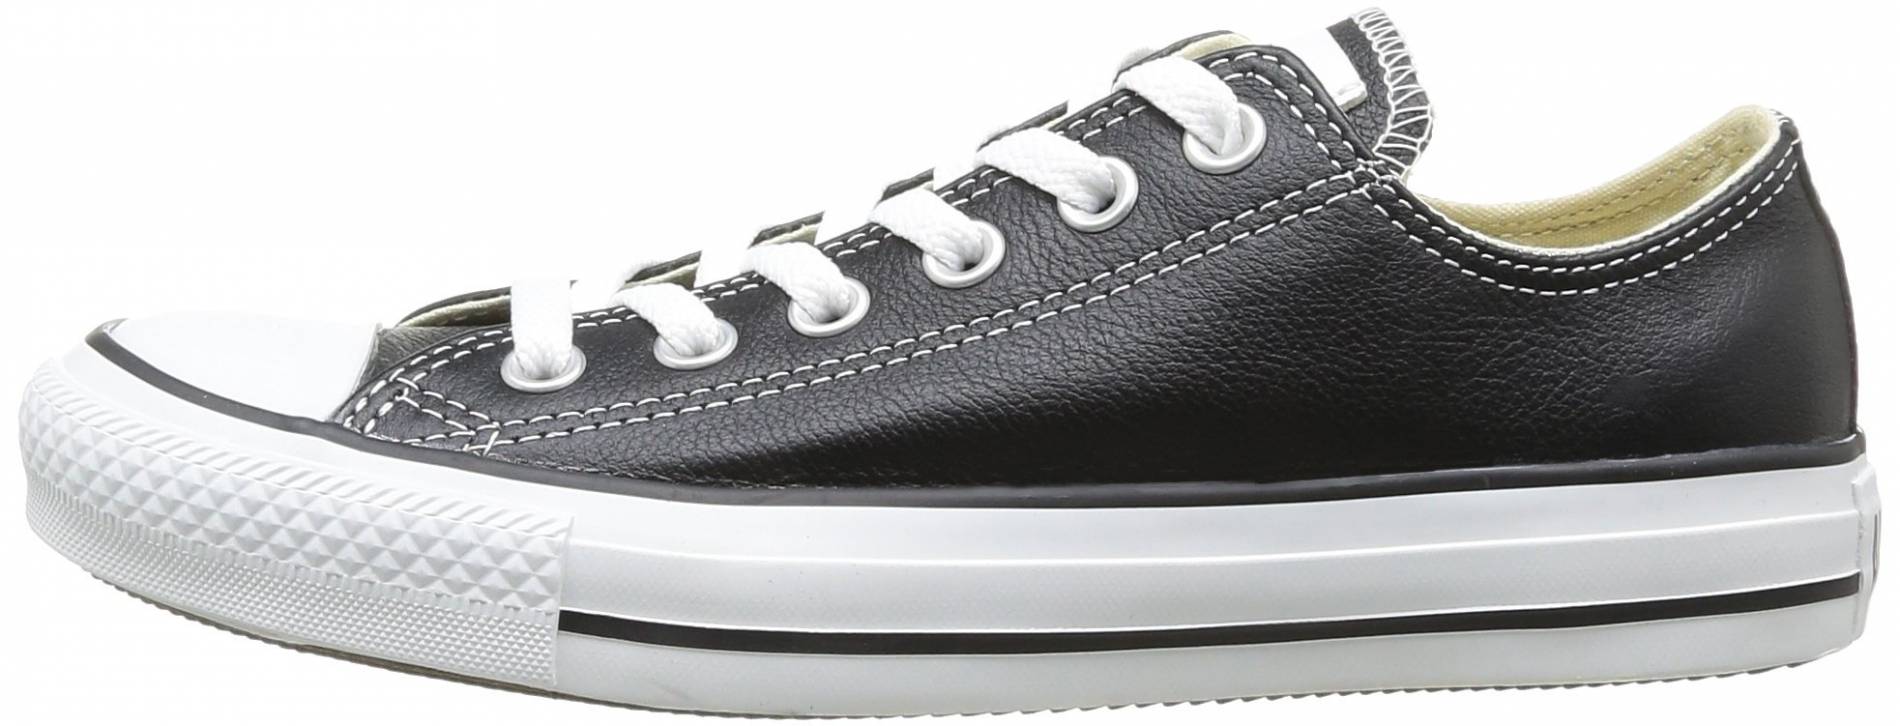 Save 33% on Converse Low Top Sneakers 